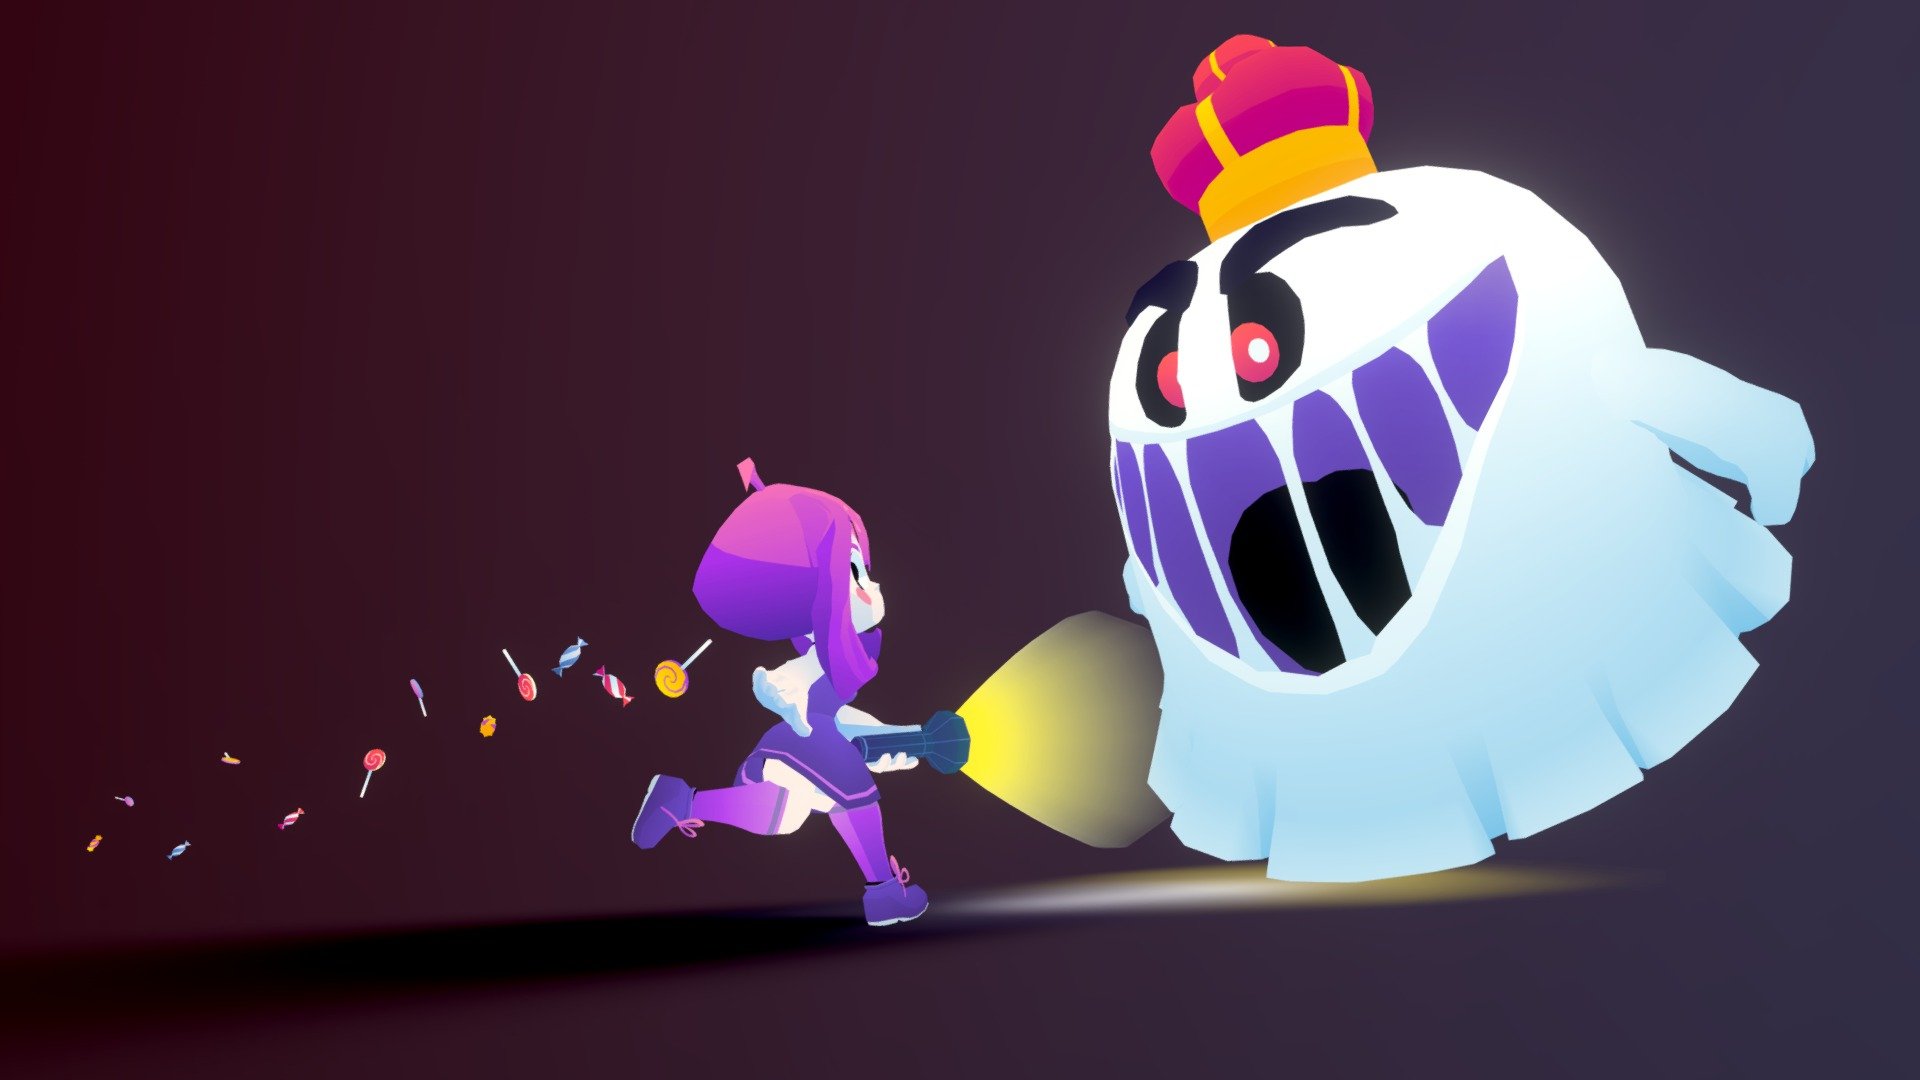 Fan art of Molli and Ghost King from Candies &lsquo;n Curses.
Its a really fun little mobile game bursting with personality and talent - check it out over yonder:

https://twitter.com/takoboystudios

android: https://play.google.com/store/apps/details?id=com.tomtominc.candiesncurses&amp;hl=en

ios: https://itunes.apple.com/us/app/candies-n-curses/id1364187784?mt=8

there's some prime quality pixel art to be found there and a pretty fun game with a decent gameplay loop. its even got a decent challenge to it!

the character designs were what really caught my attention - its nothing extravagant but just so well done and just my style. it was really straightforward to create this piece and a lot of fun to boot.

the model took a few days of work, mostly due to getting used to juggling between blender 2.8 and 2.79 and the troubles that come with that :P - Candies 'n Curses - 3D model by aranearchon 3d model